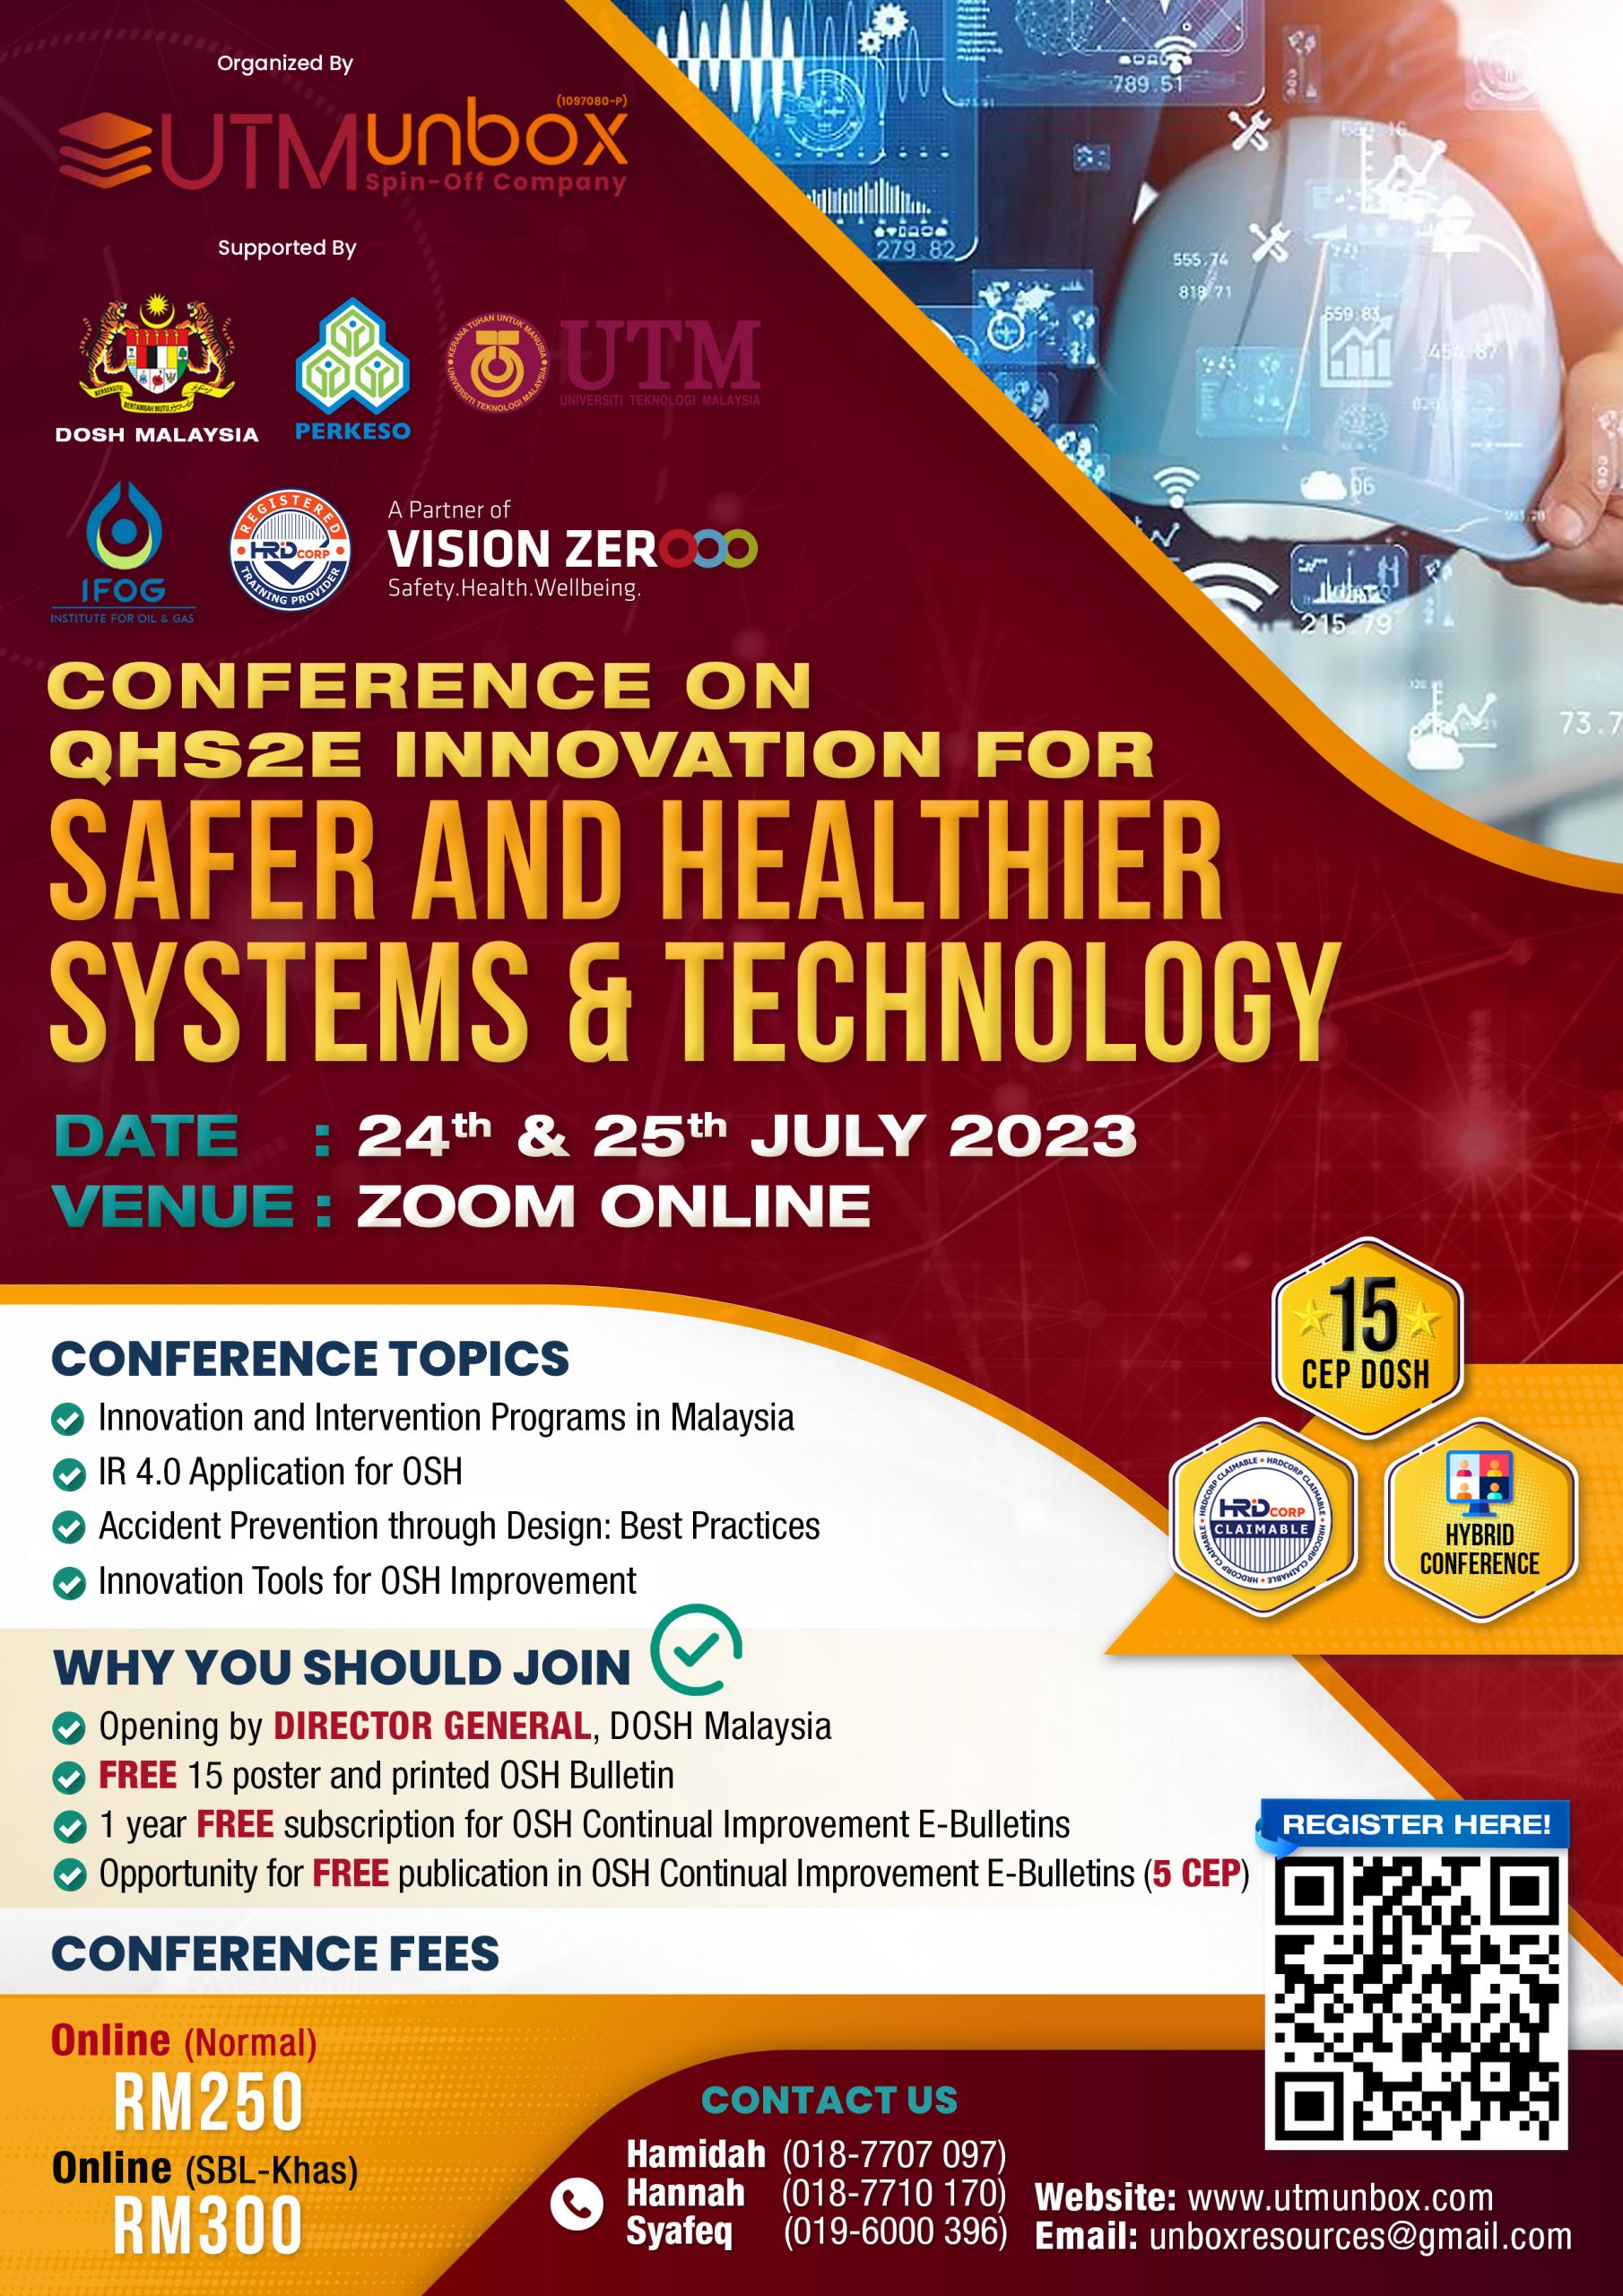 You are currently viewing CONFERENCE ON QHS2E INNOVATION FOR SAFER AND HEALTHIER SYSTEMS & TECHNOLOGY